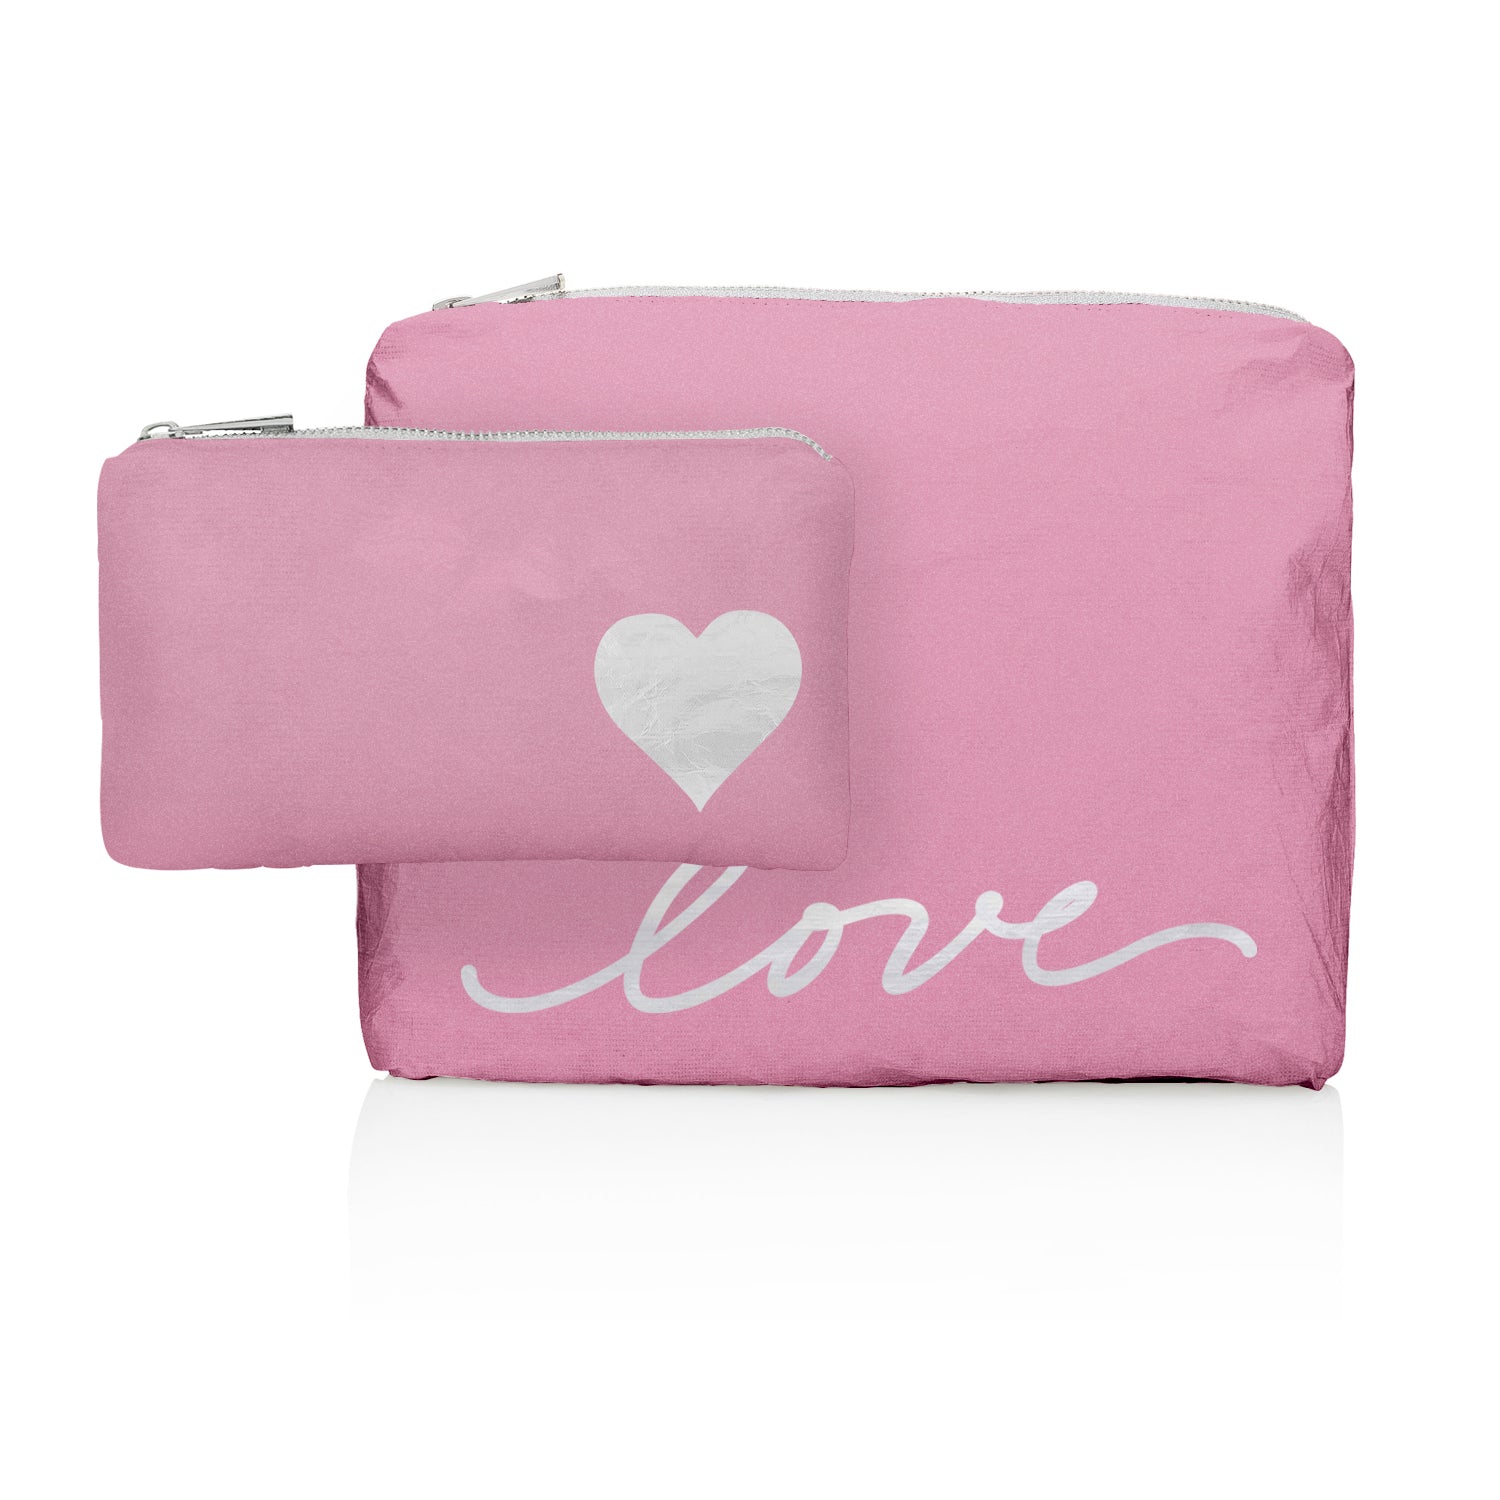 Set of Two - Organizational Packs - Fairy Pink with Silver Script "love" & Heart